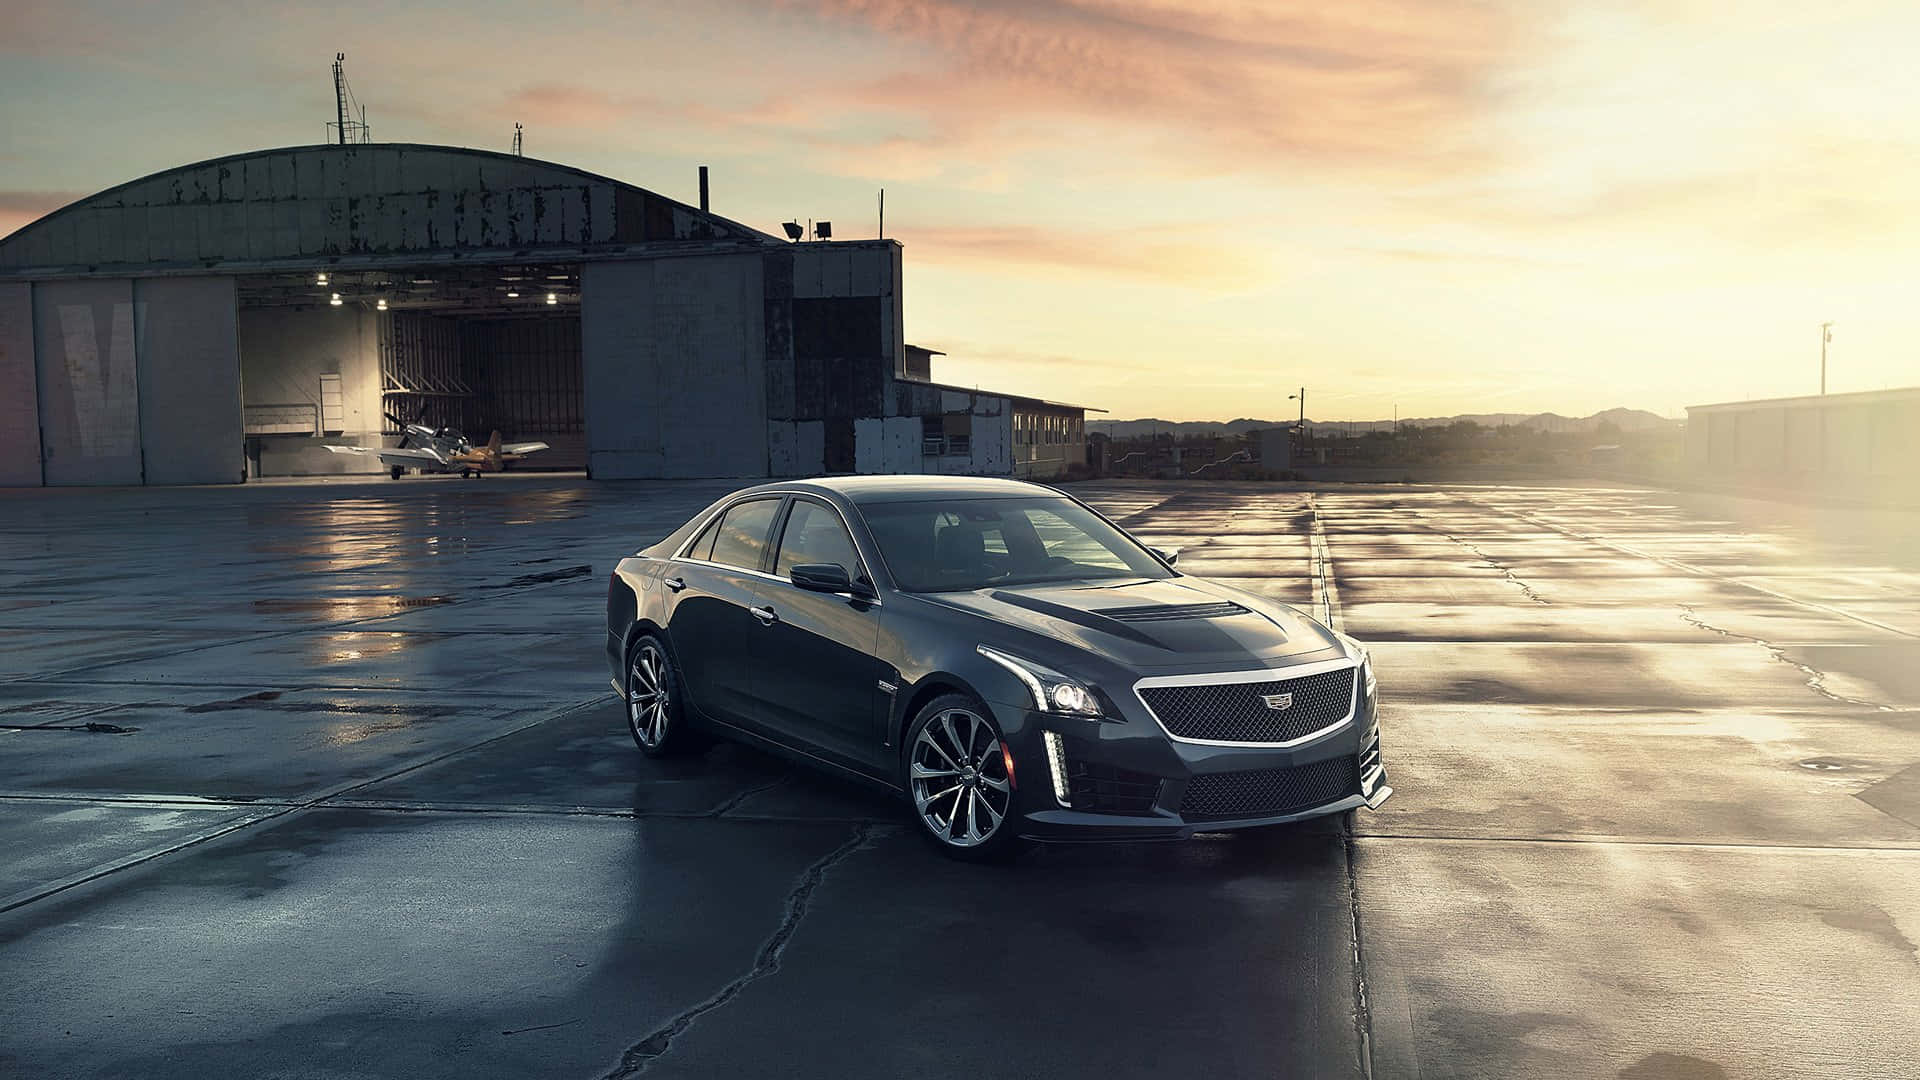 Caption: Luxury Redefined - Cadillac CTS Wallpaper